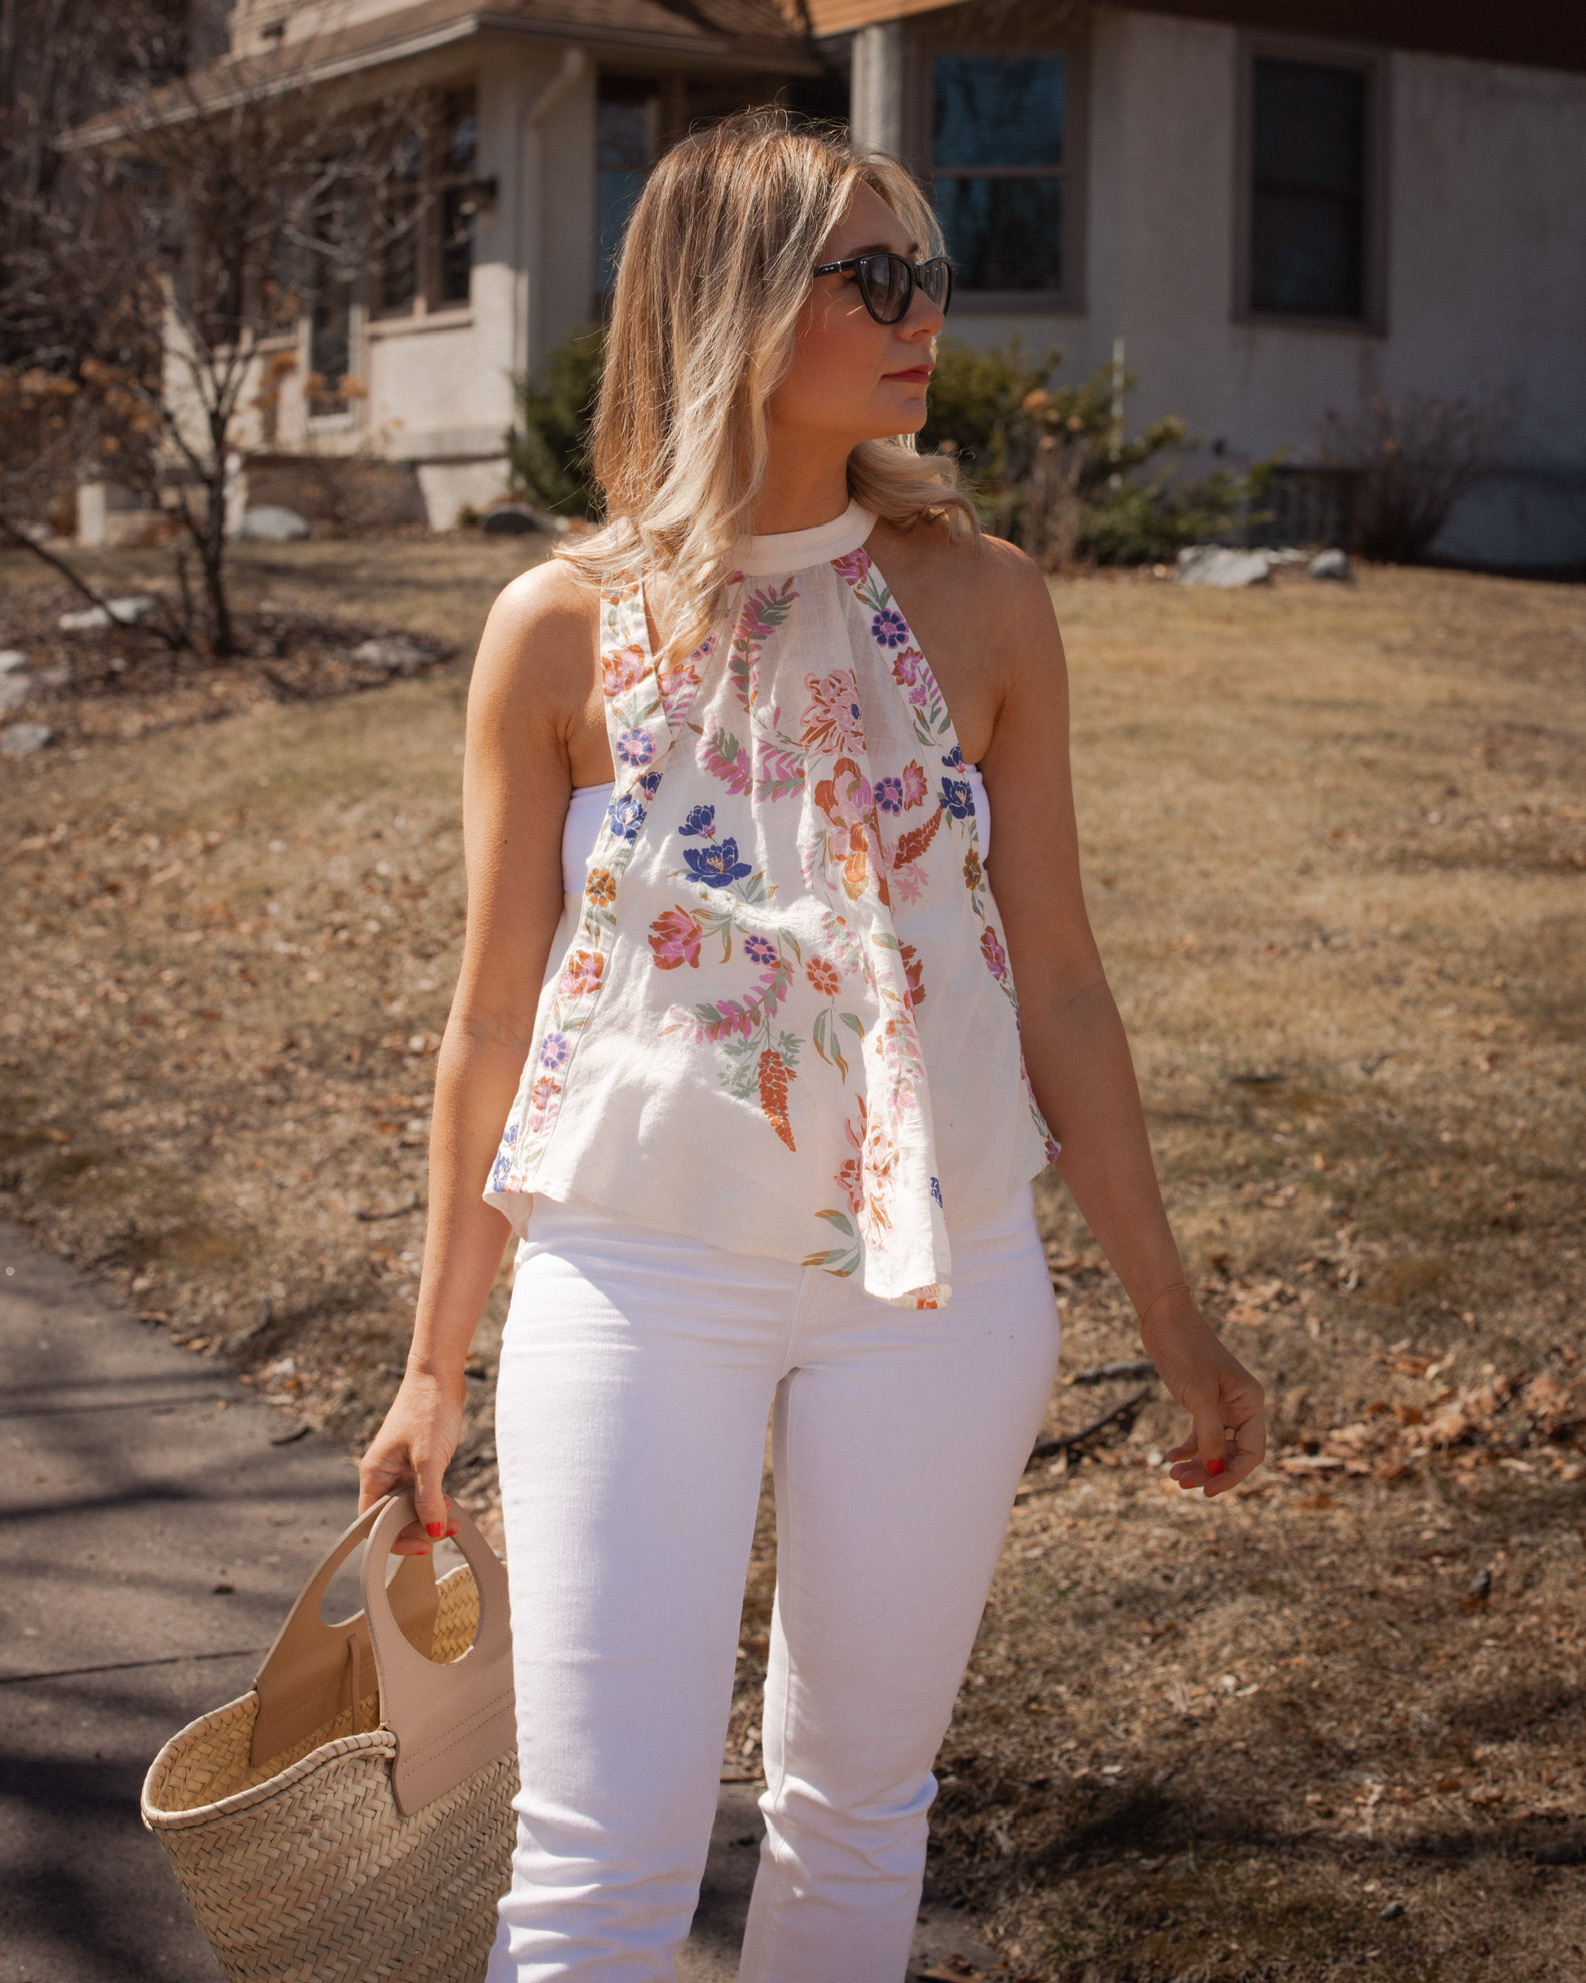 Karin Emily shares a mother's day brunch look with a floral halter top, white crop top, white jeans from Mother, and Isabel Marant Sunglasses